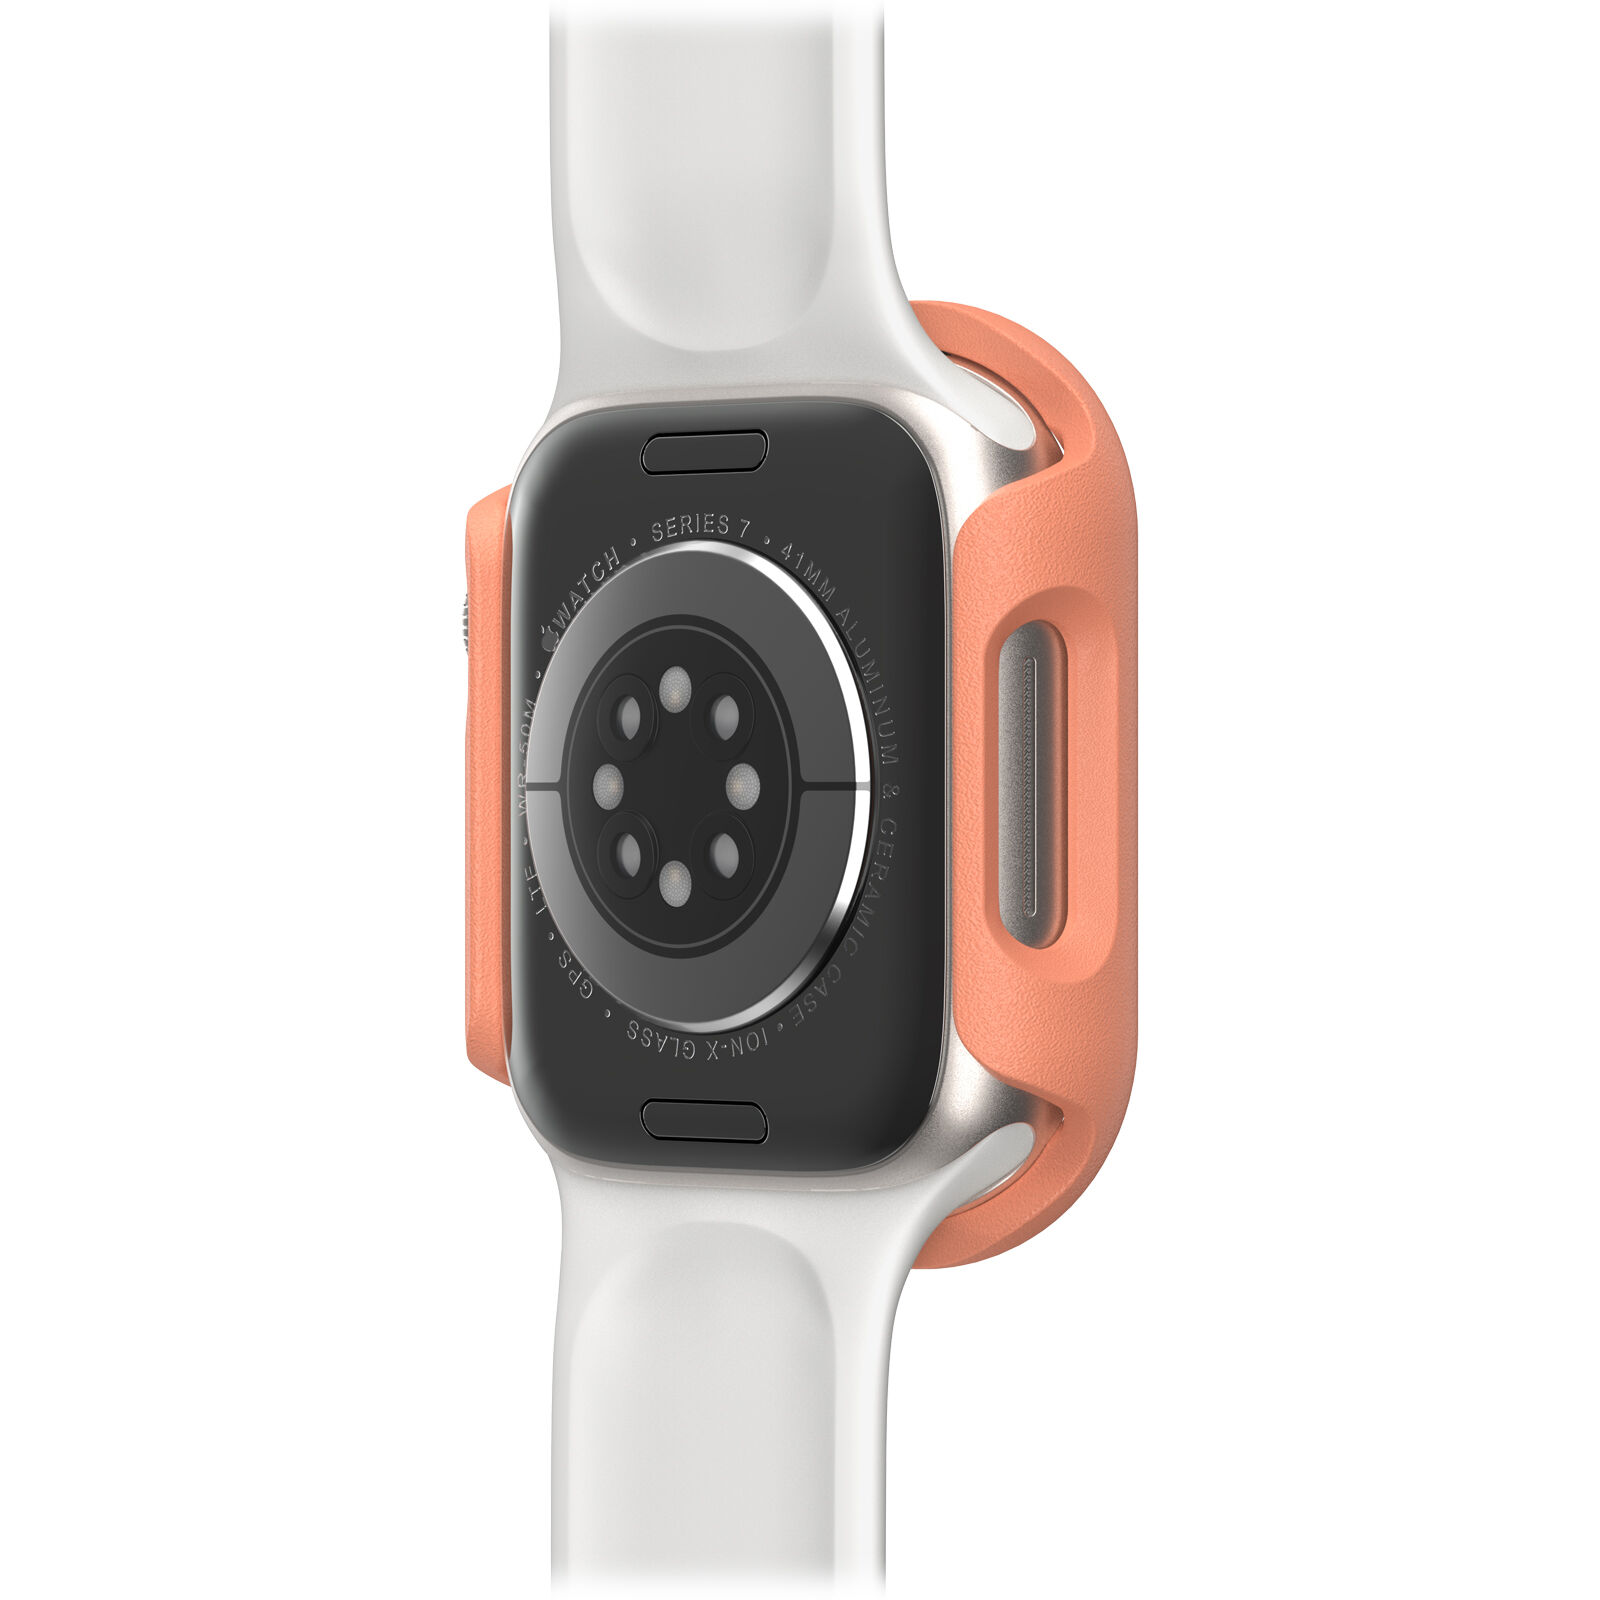 Orange Apple Watch Protective Case | OtterBox Cases for Apple